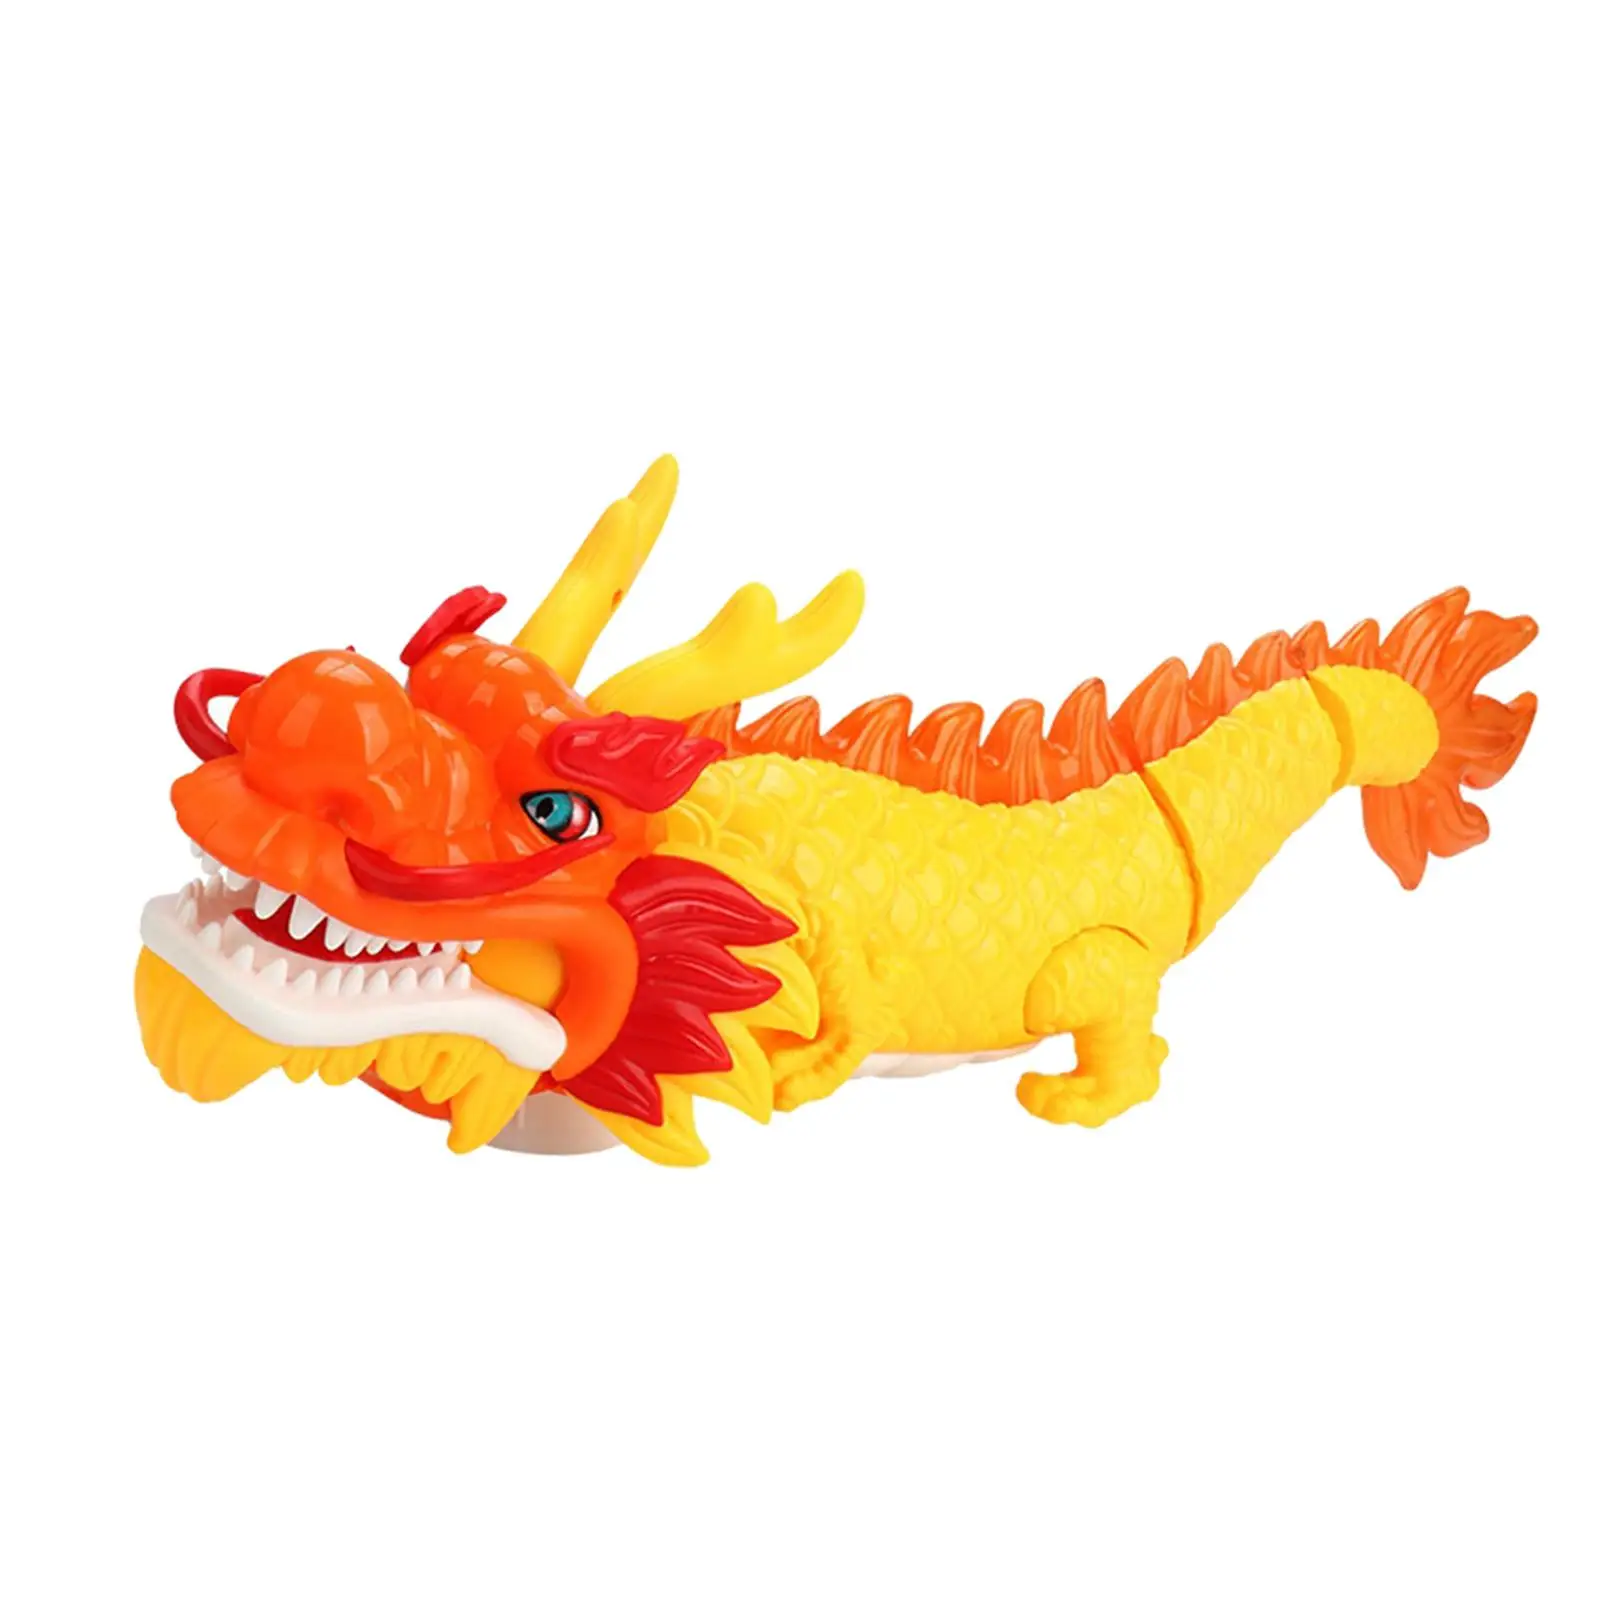 Eletric Dragon Toy Realistic Walking Educational Learning Novelty Infant Toy for Children 4 5 6 7 8 9 Year Olds Boys Kid Adults